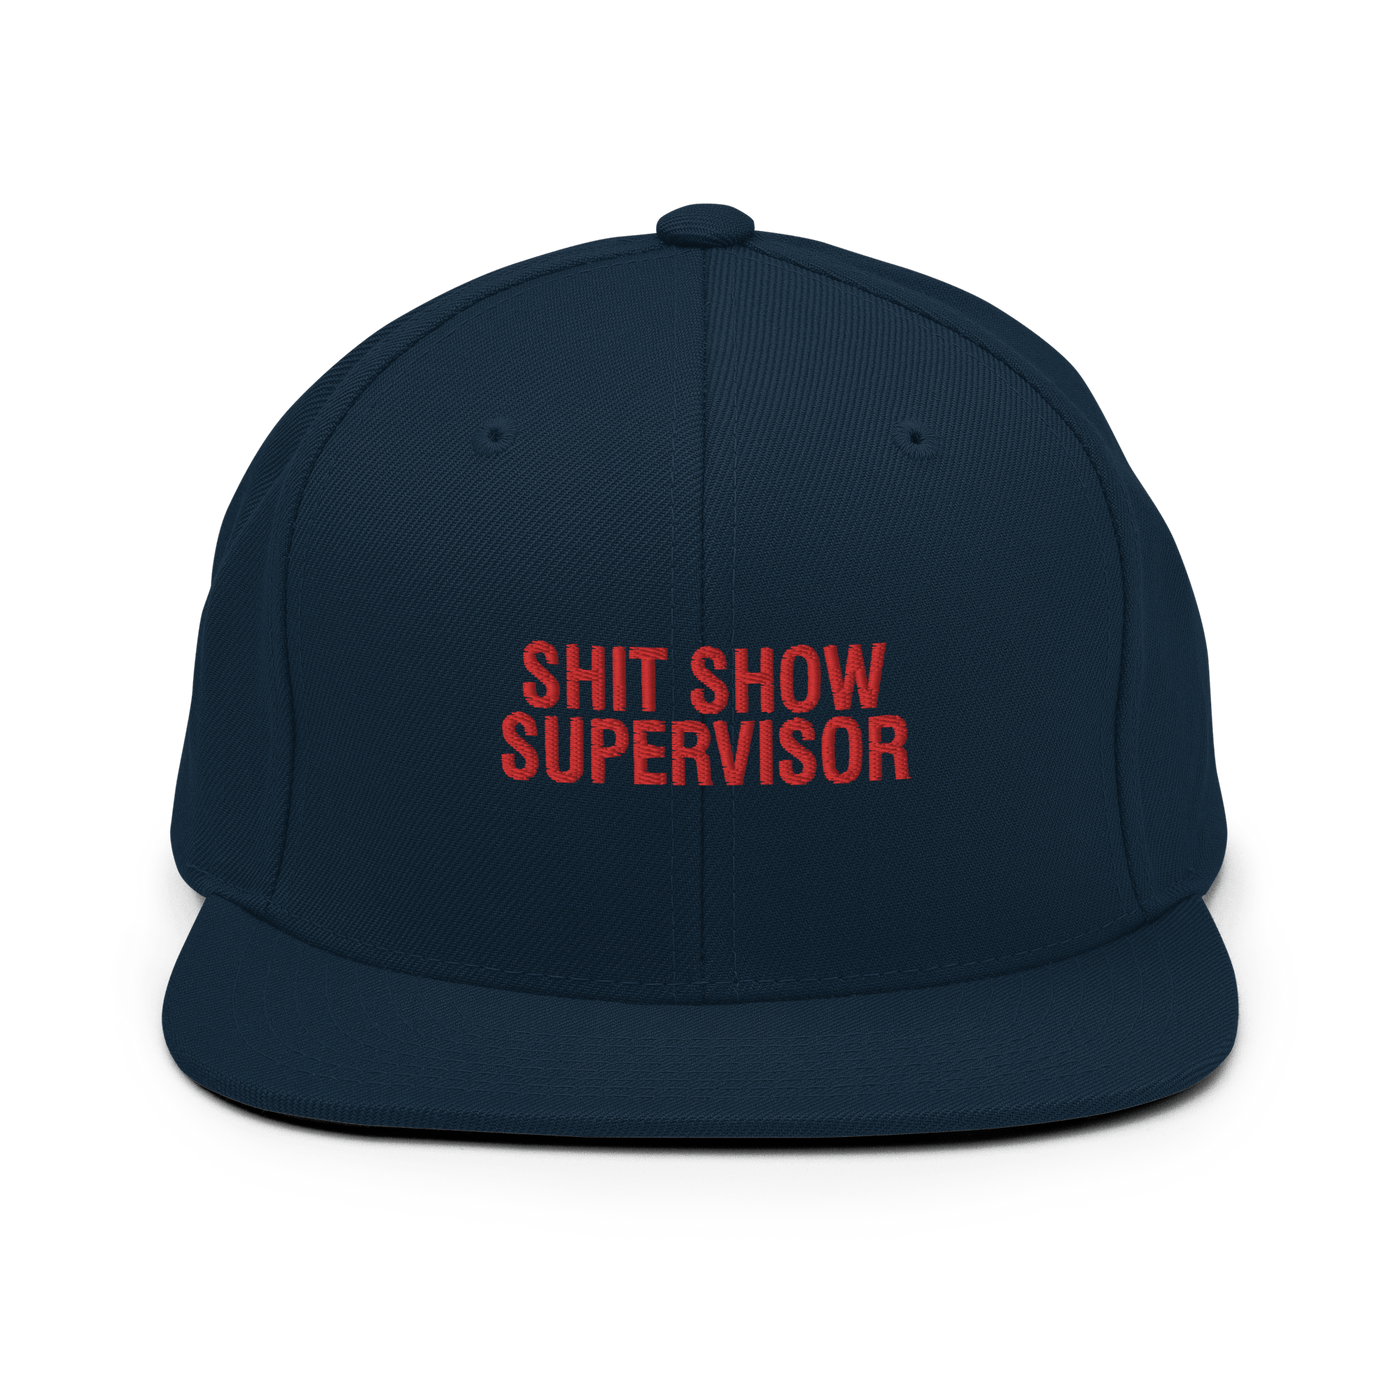 Shit Show Supervisor Snapback - Dark Navy - Just Another Cap Store